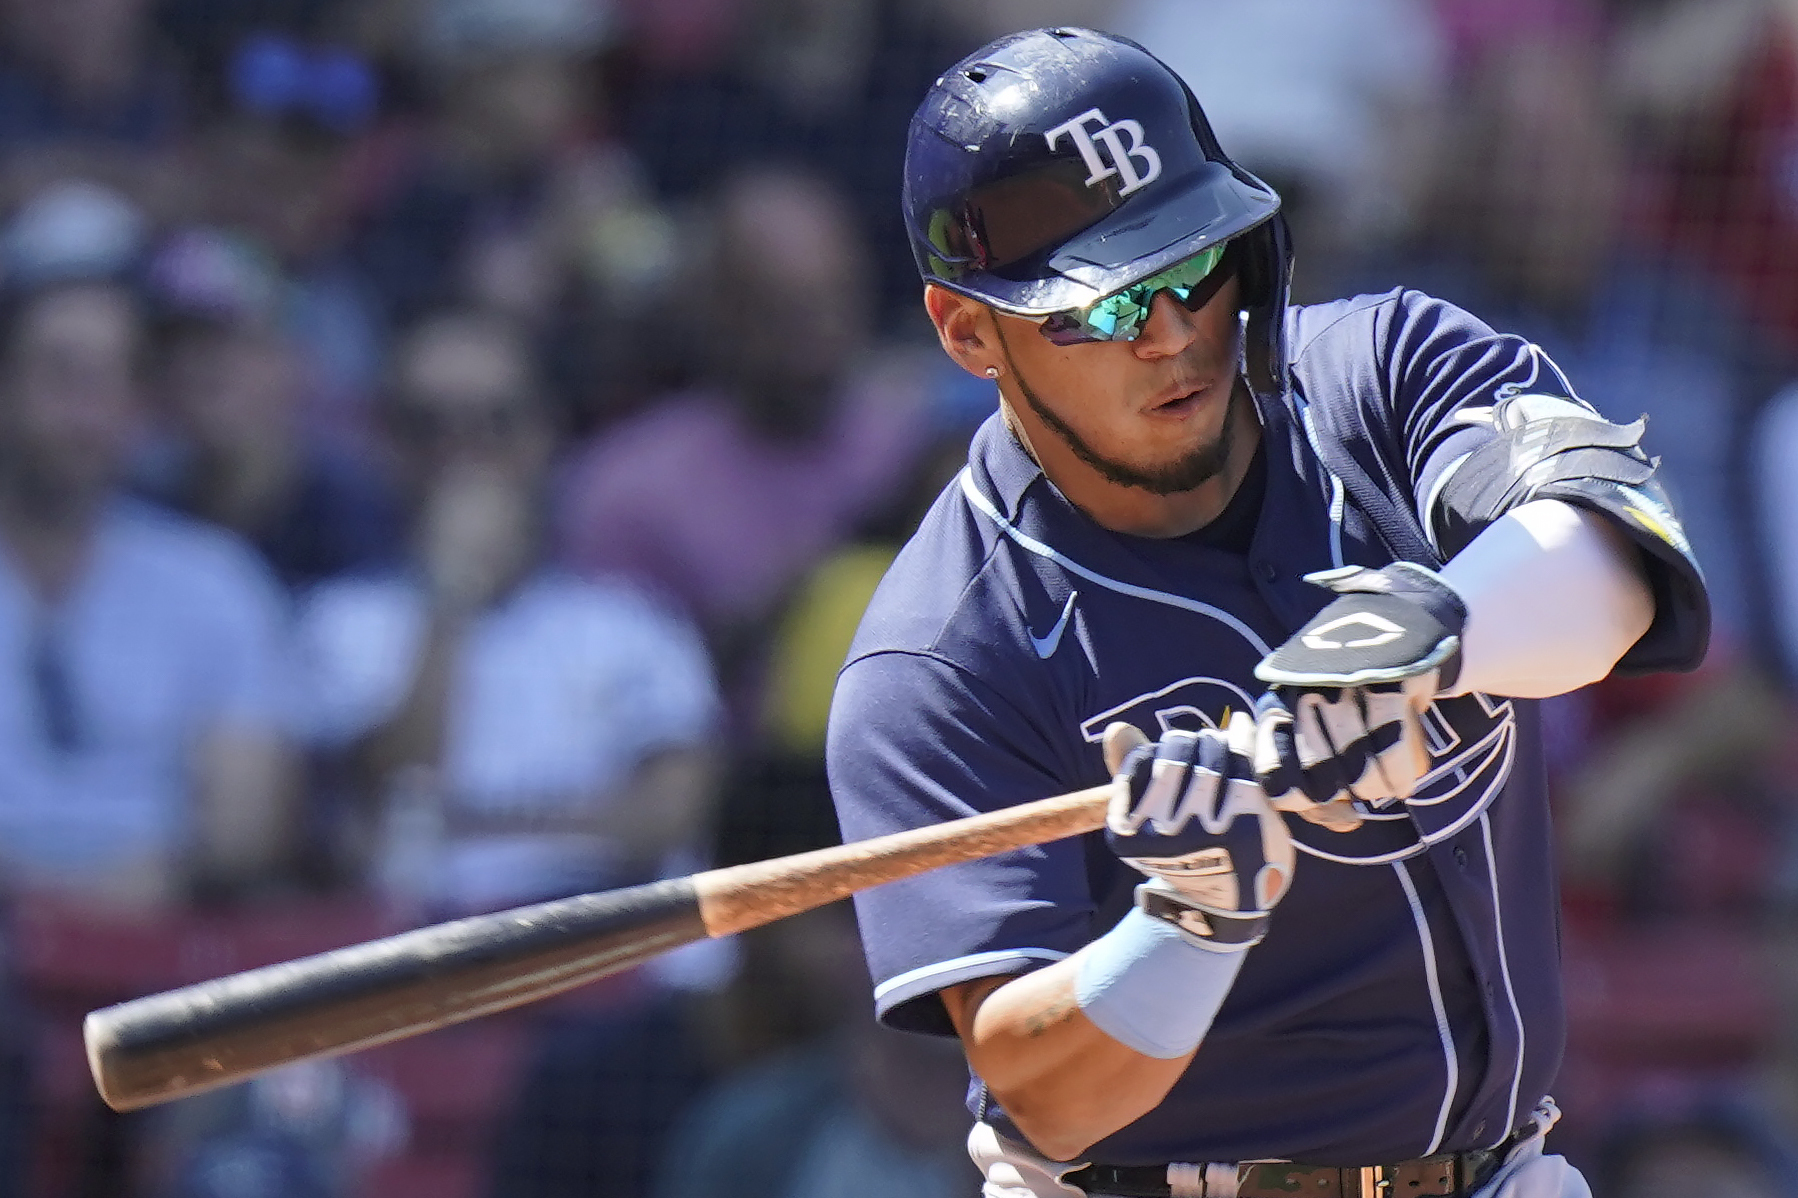 Isaac Paredes' Rays power surge worth riding in fantasy baseball